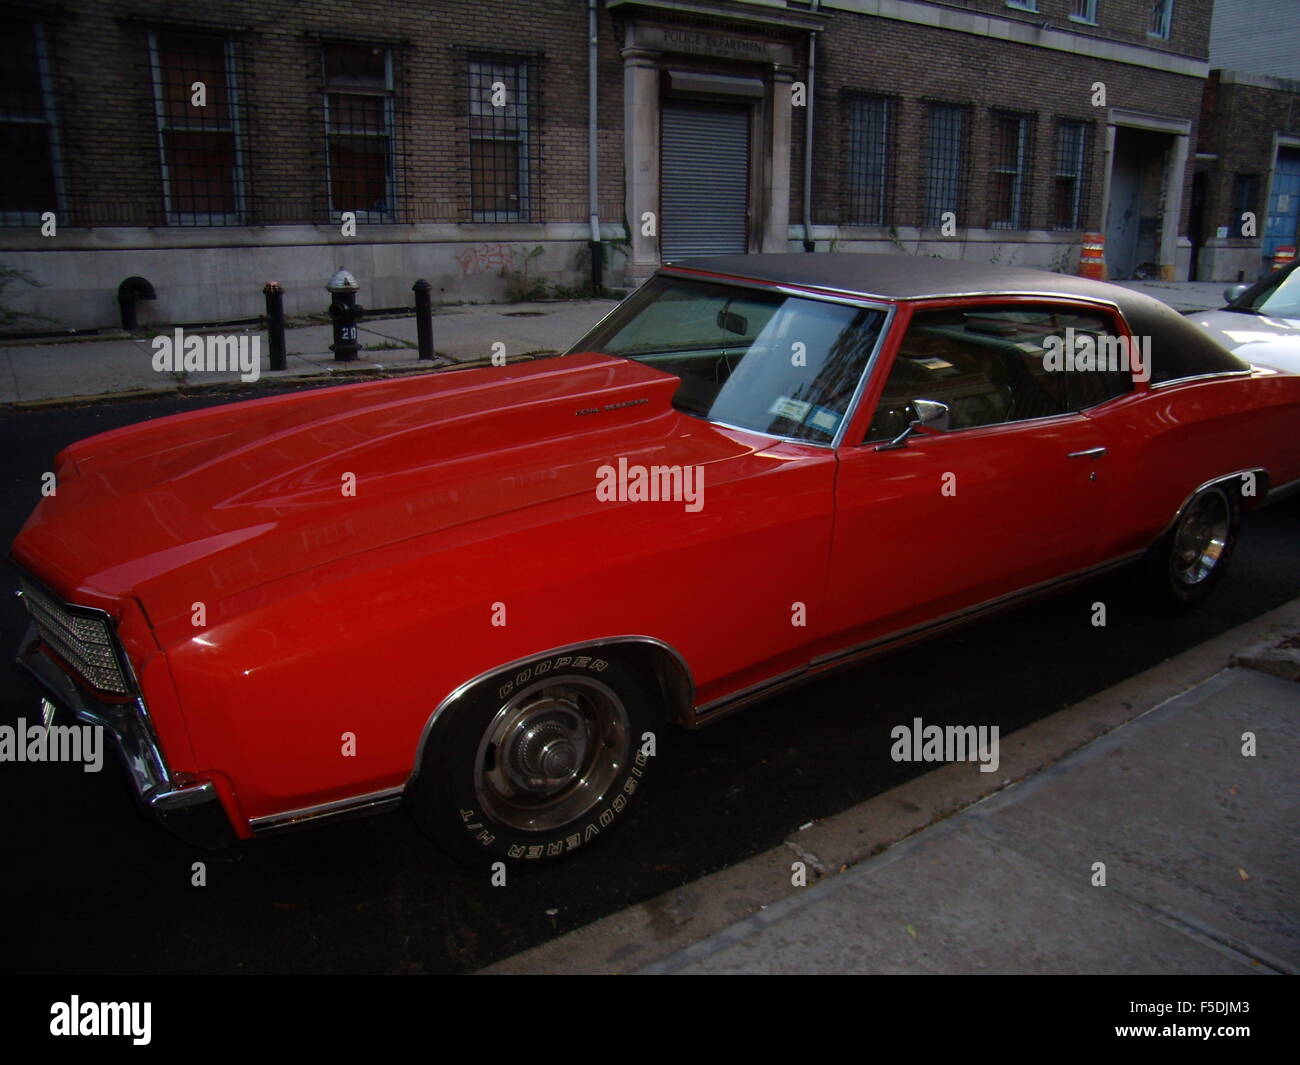 Red Car, Ford, Mustang, cadillac,. New York Stock Photo